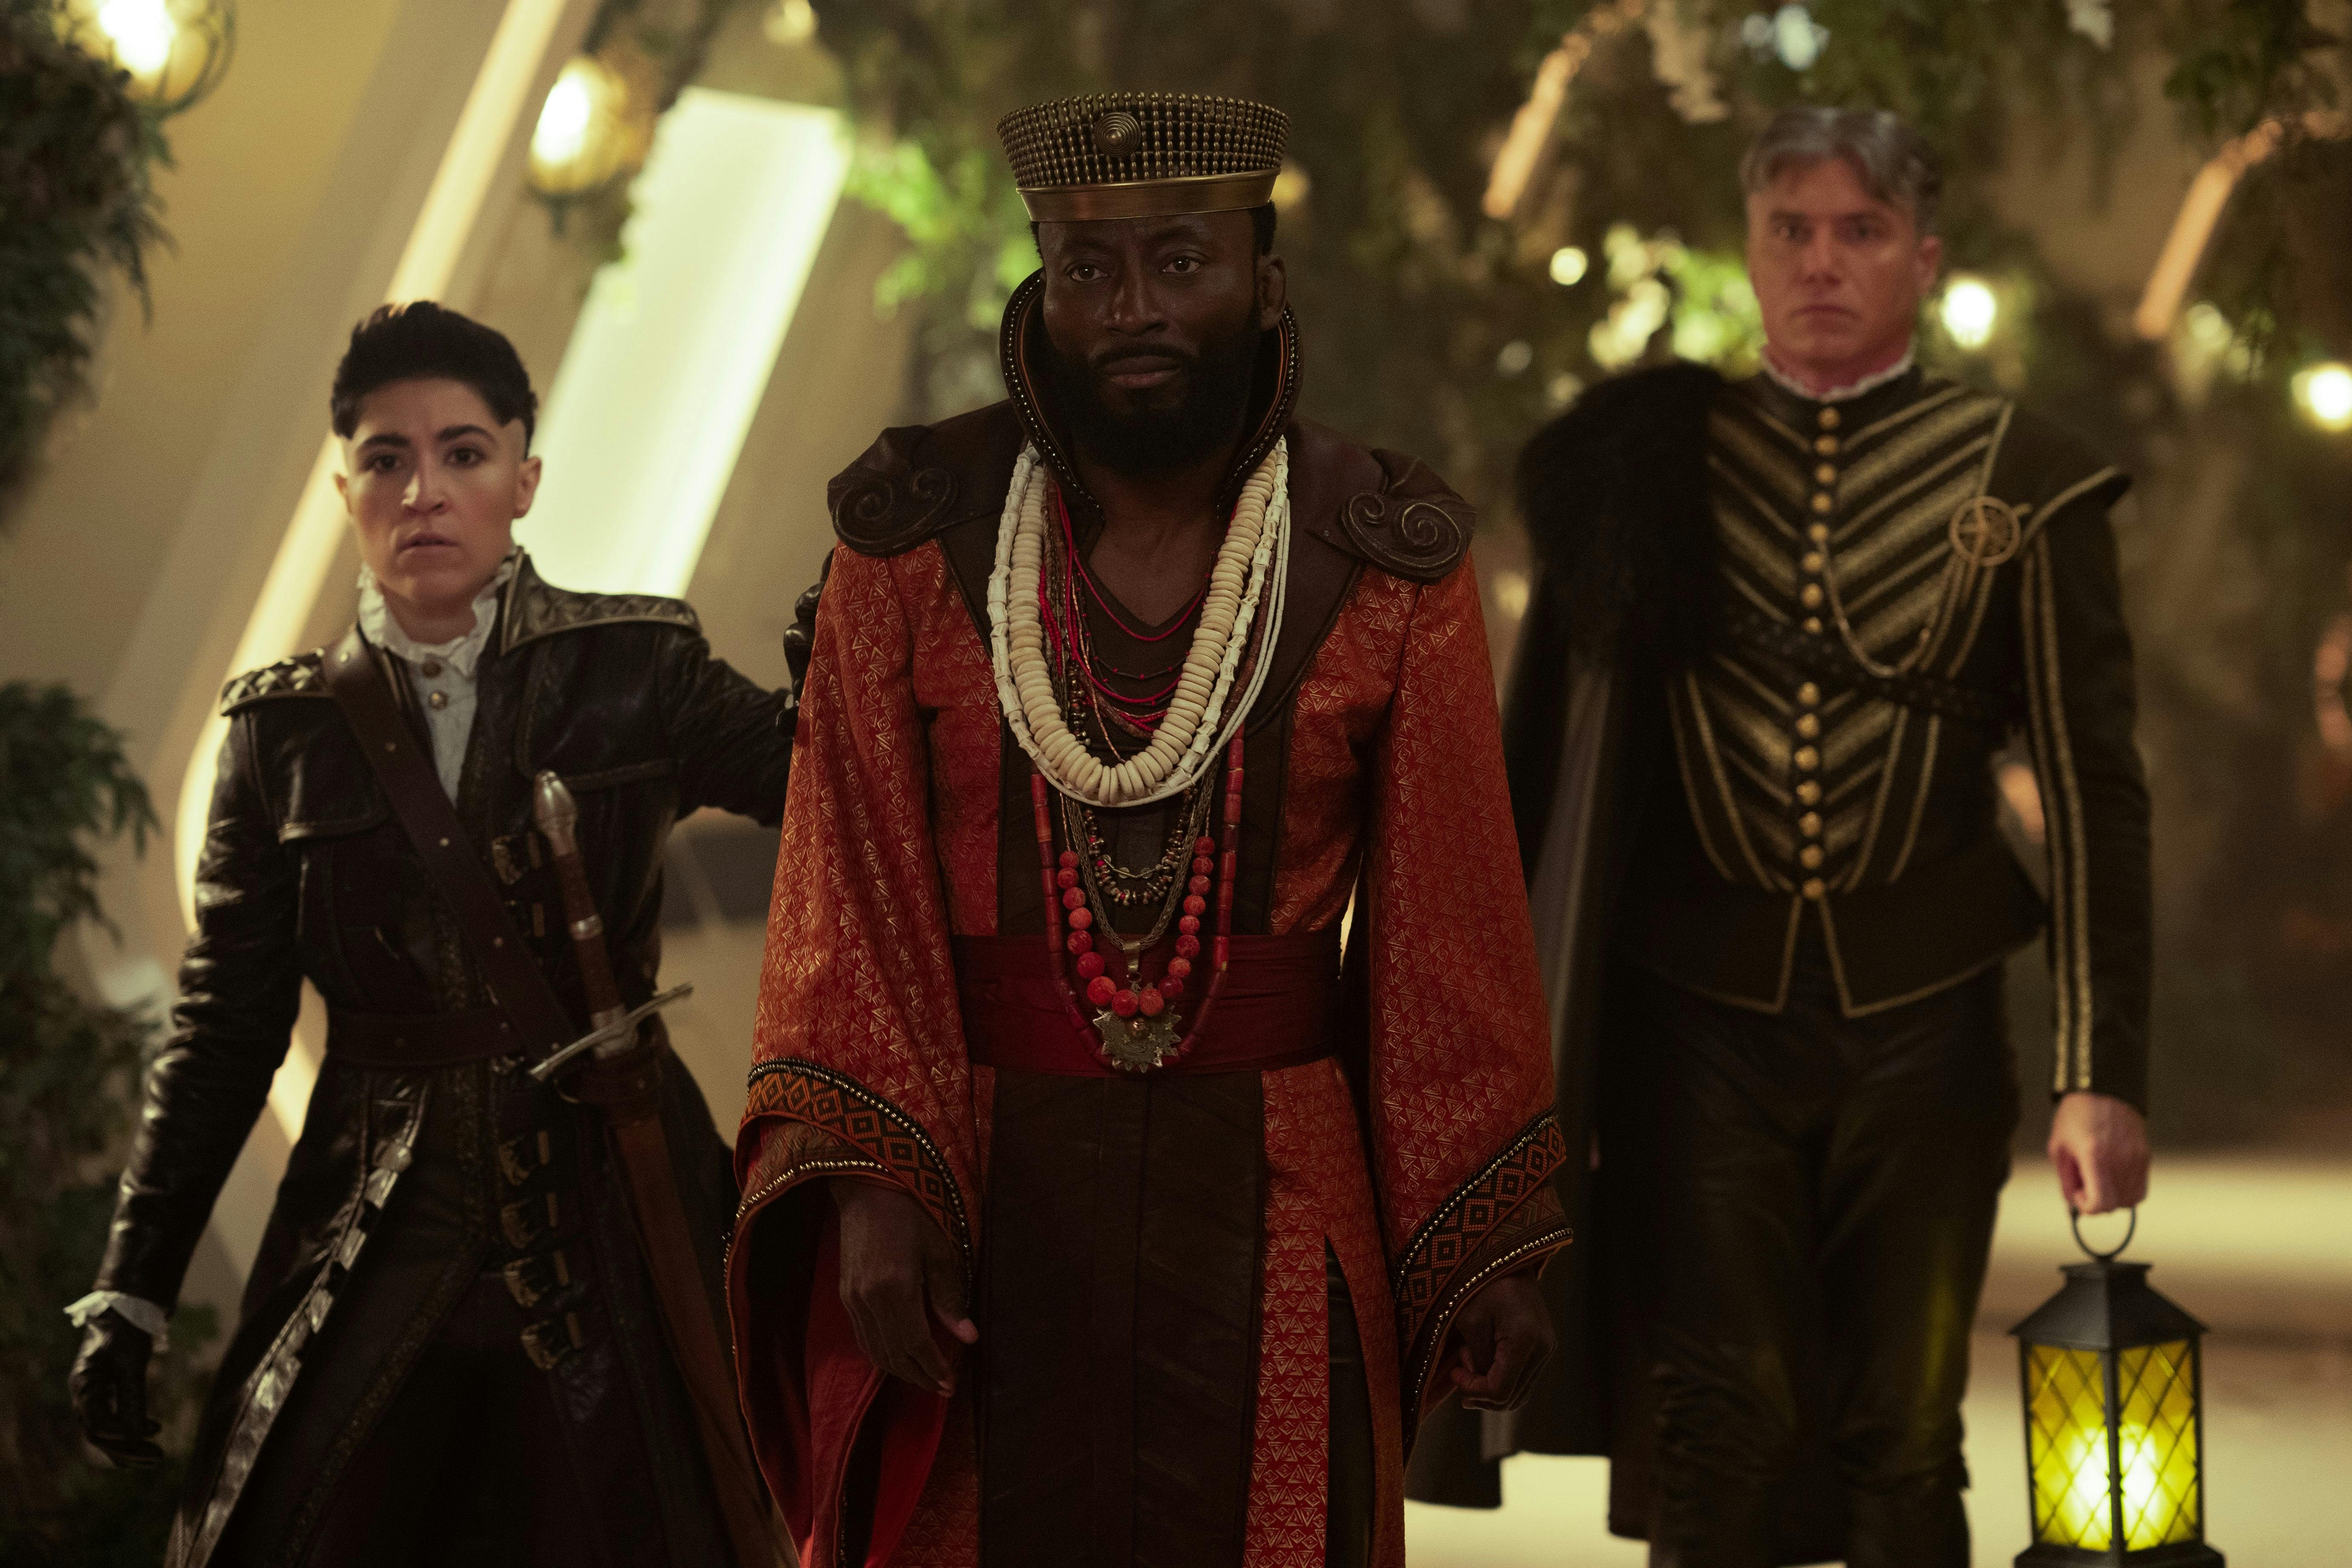 M'Benga (Babs Olusanmokun), wearing robes and a crown, walks down the Enterprise's hallway. Ortegas (Melissa Navia) and Pike (Anson Mount) follow him. Pike holds a lantern, and both characters are dressed in medieval costumes in 'The Elysian Kingdom'